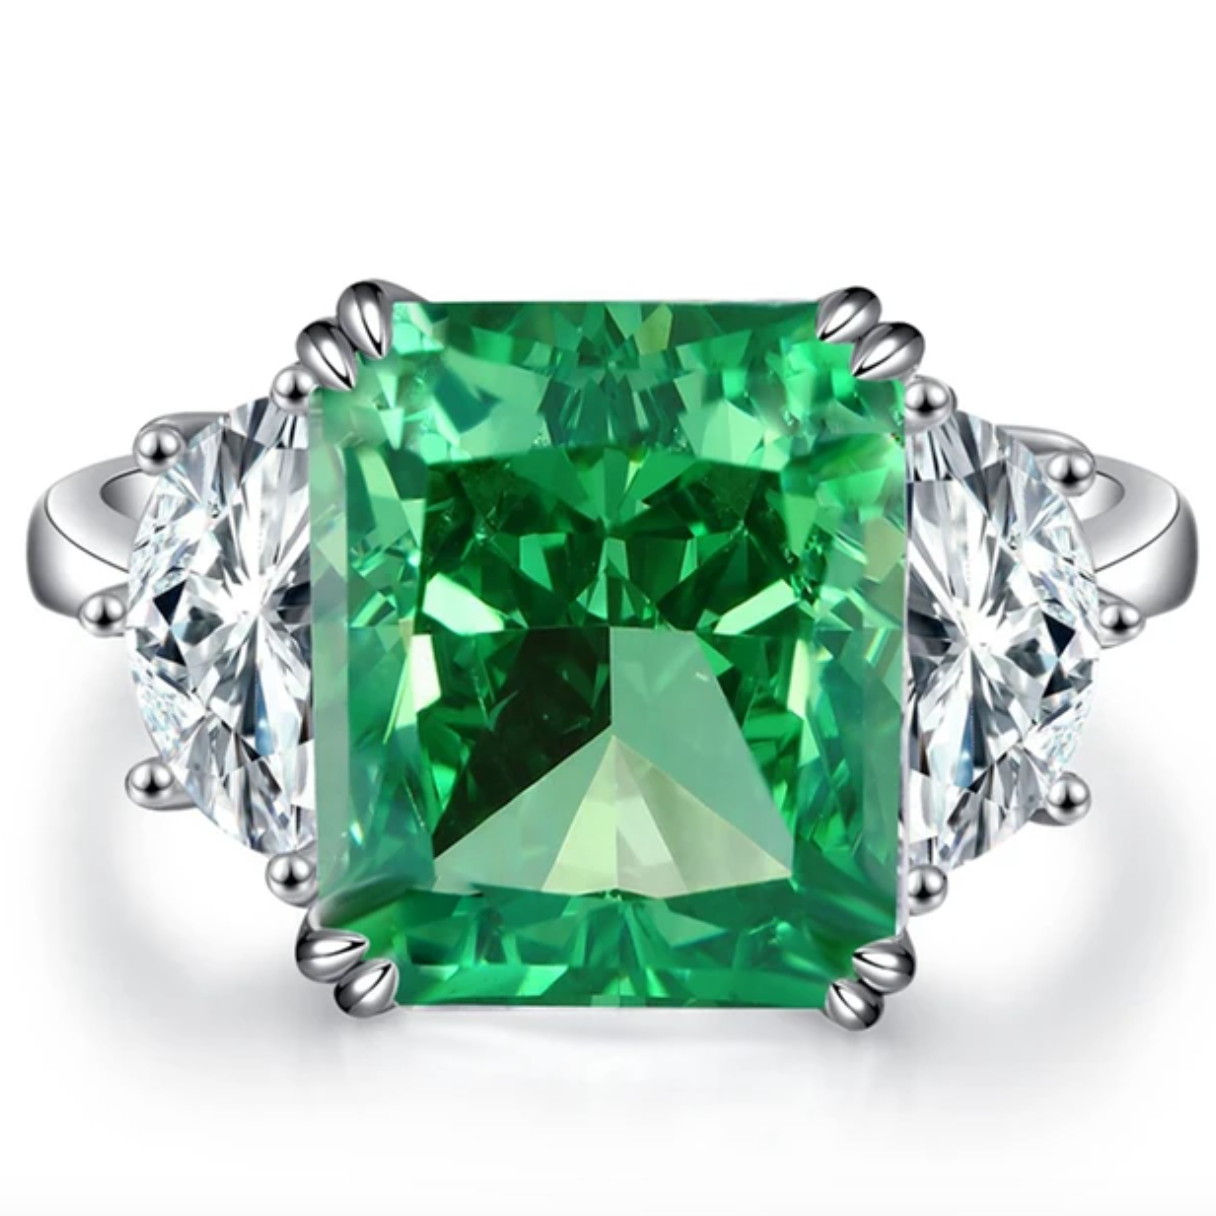 Cushion Cut Cocktail Ring, Emerald Green, 9 Carats, Sterling Silver by Margalit Rings